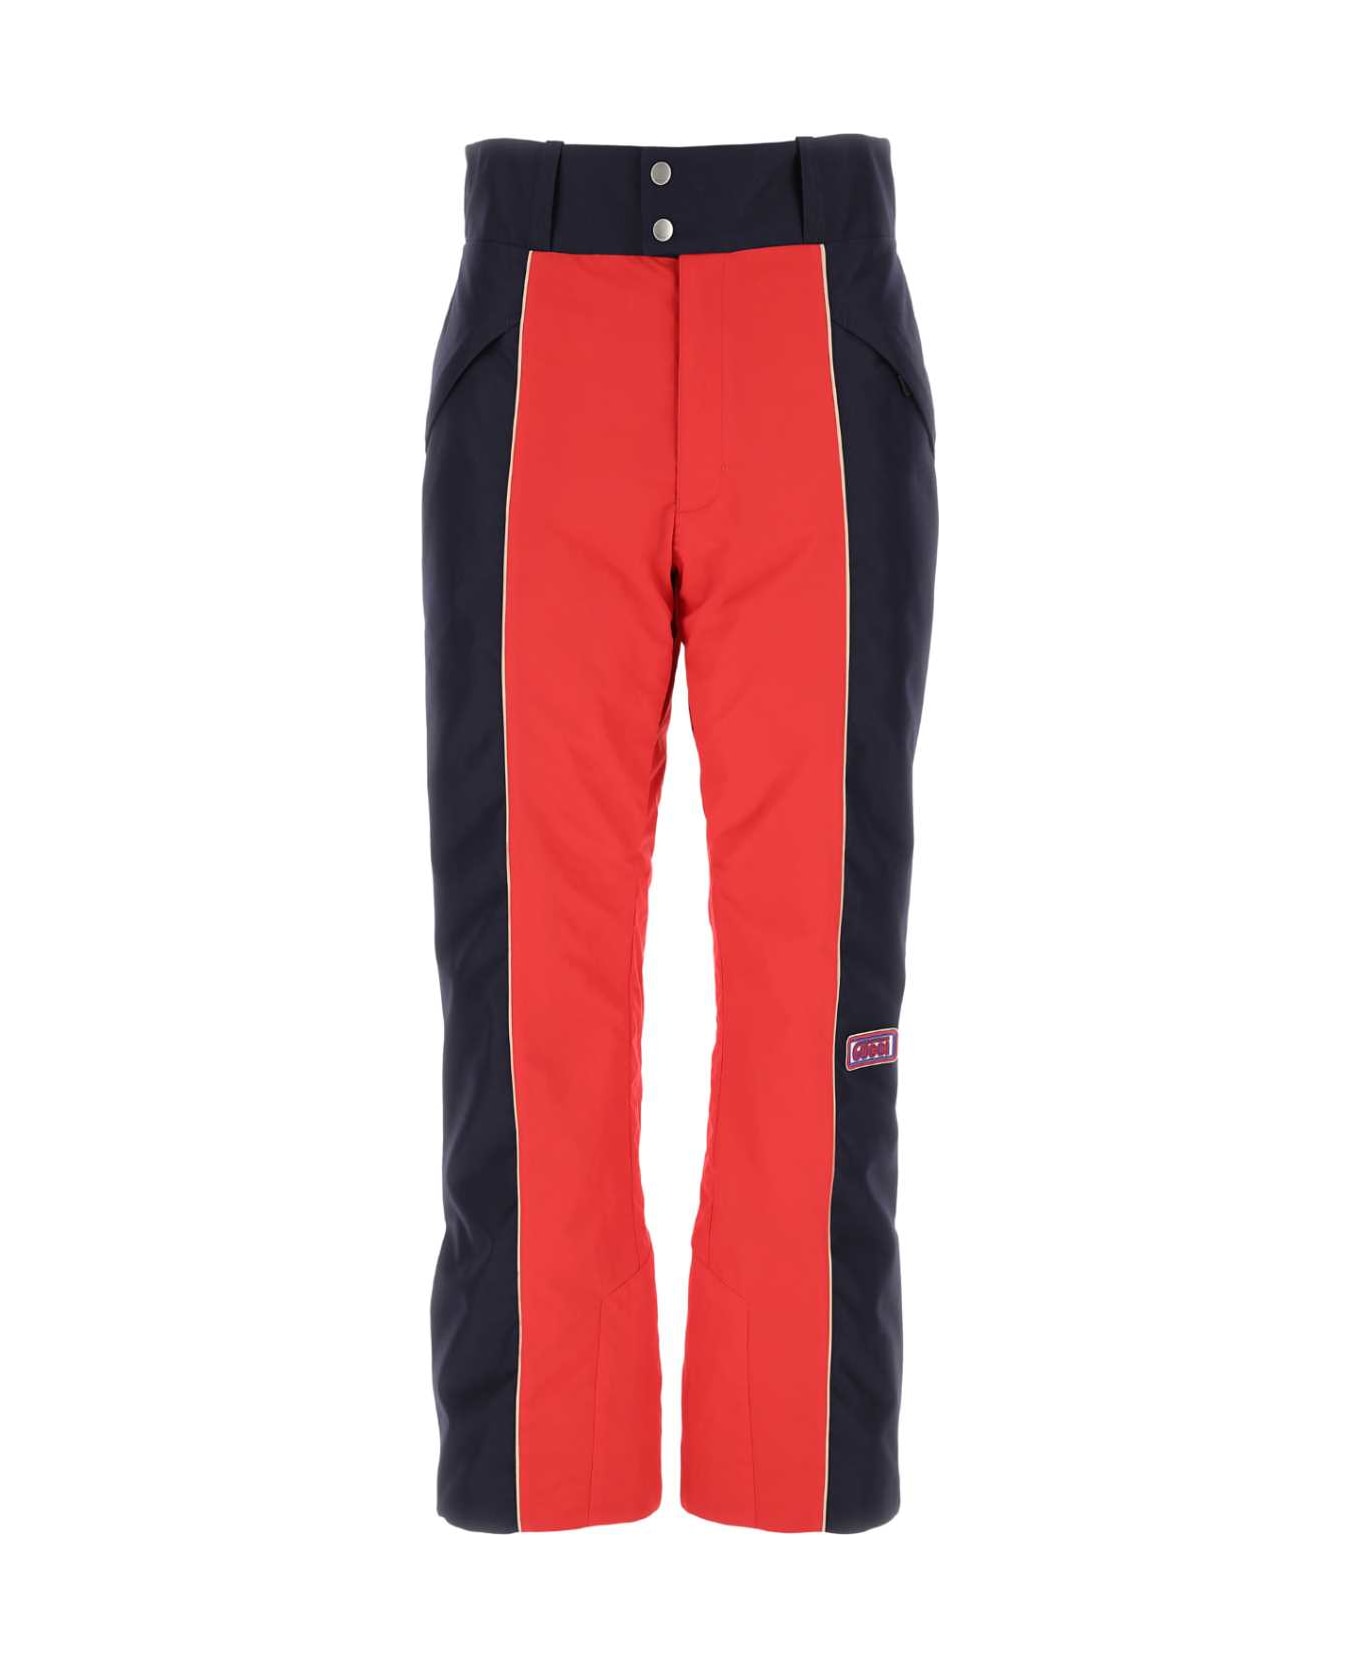 Gucci Two-tone Polyester Ski Pant - Multicolor ボトムス